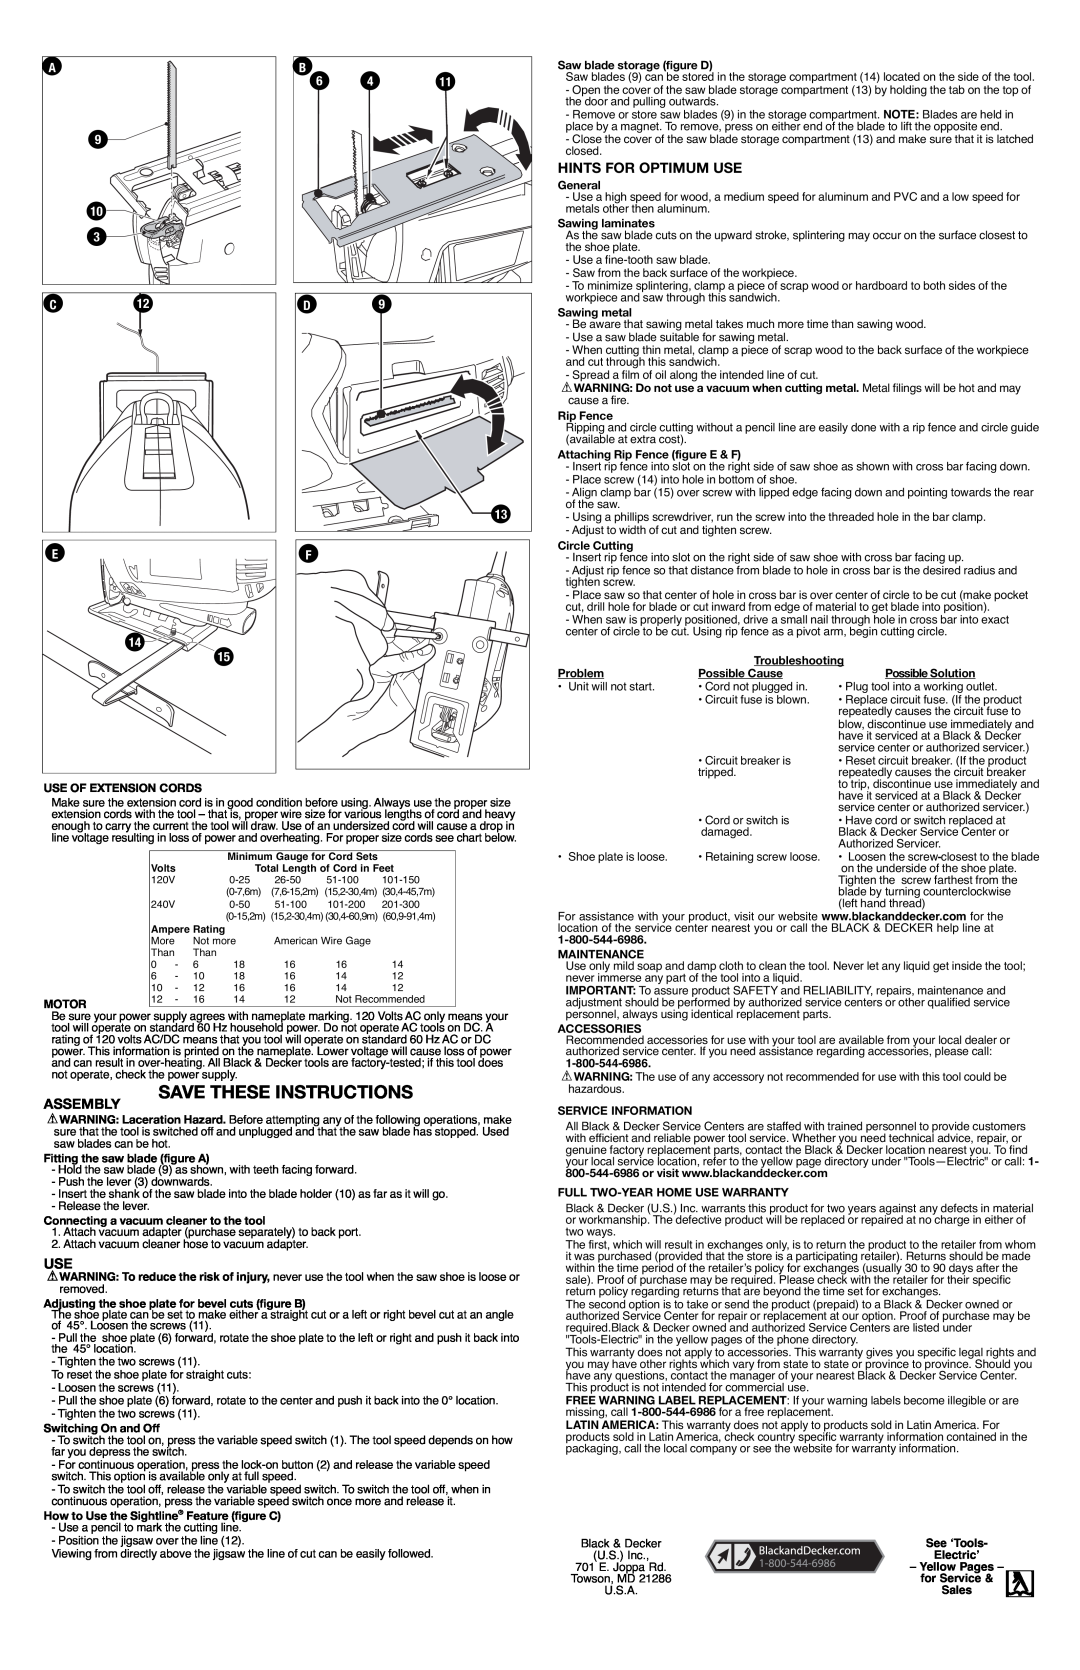 Black & Decker JS515 instruction manual Save These Instructions, Hints For Optimum Use, Assembly 